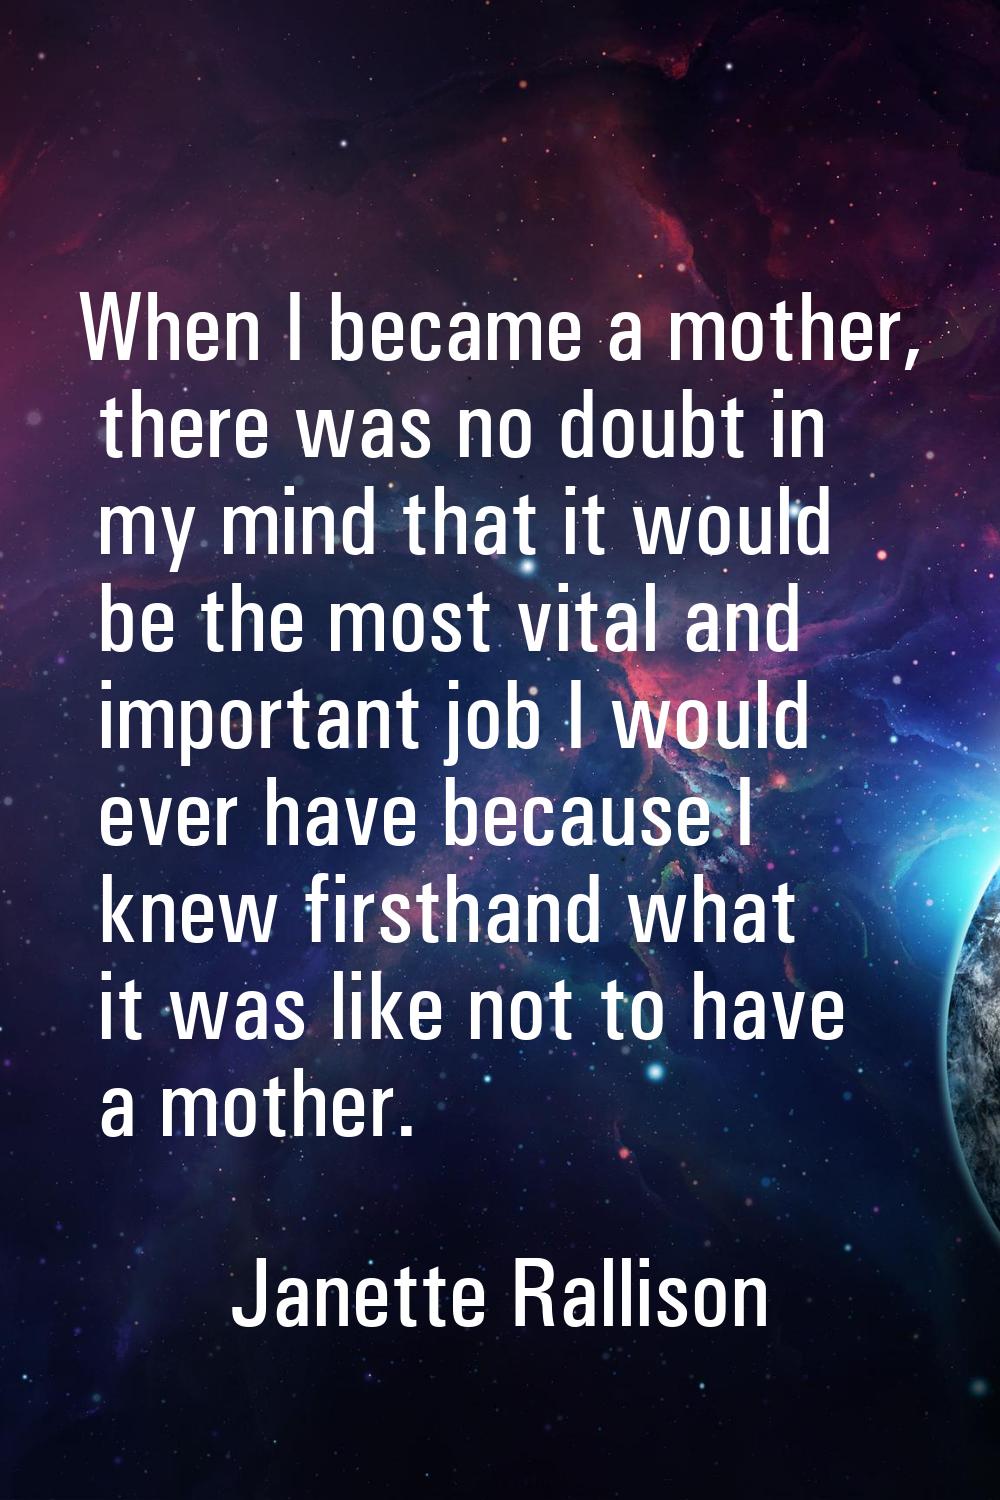 When I became a mother, there was no doubt in my mind that it would be the most vital and important